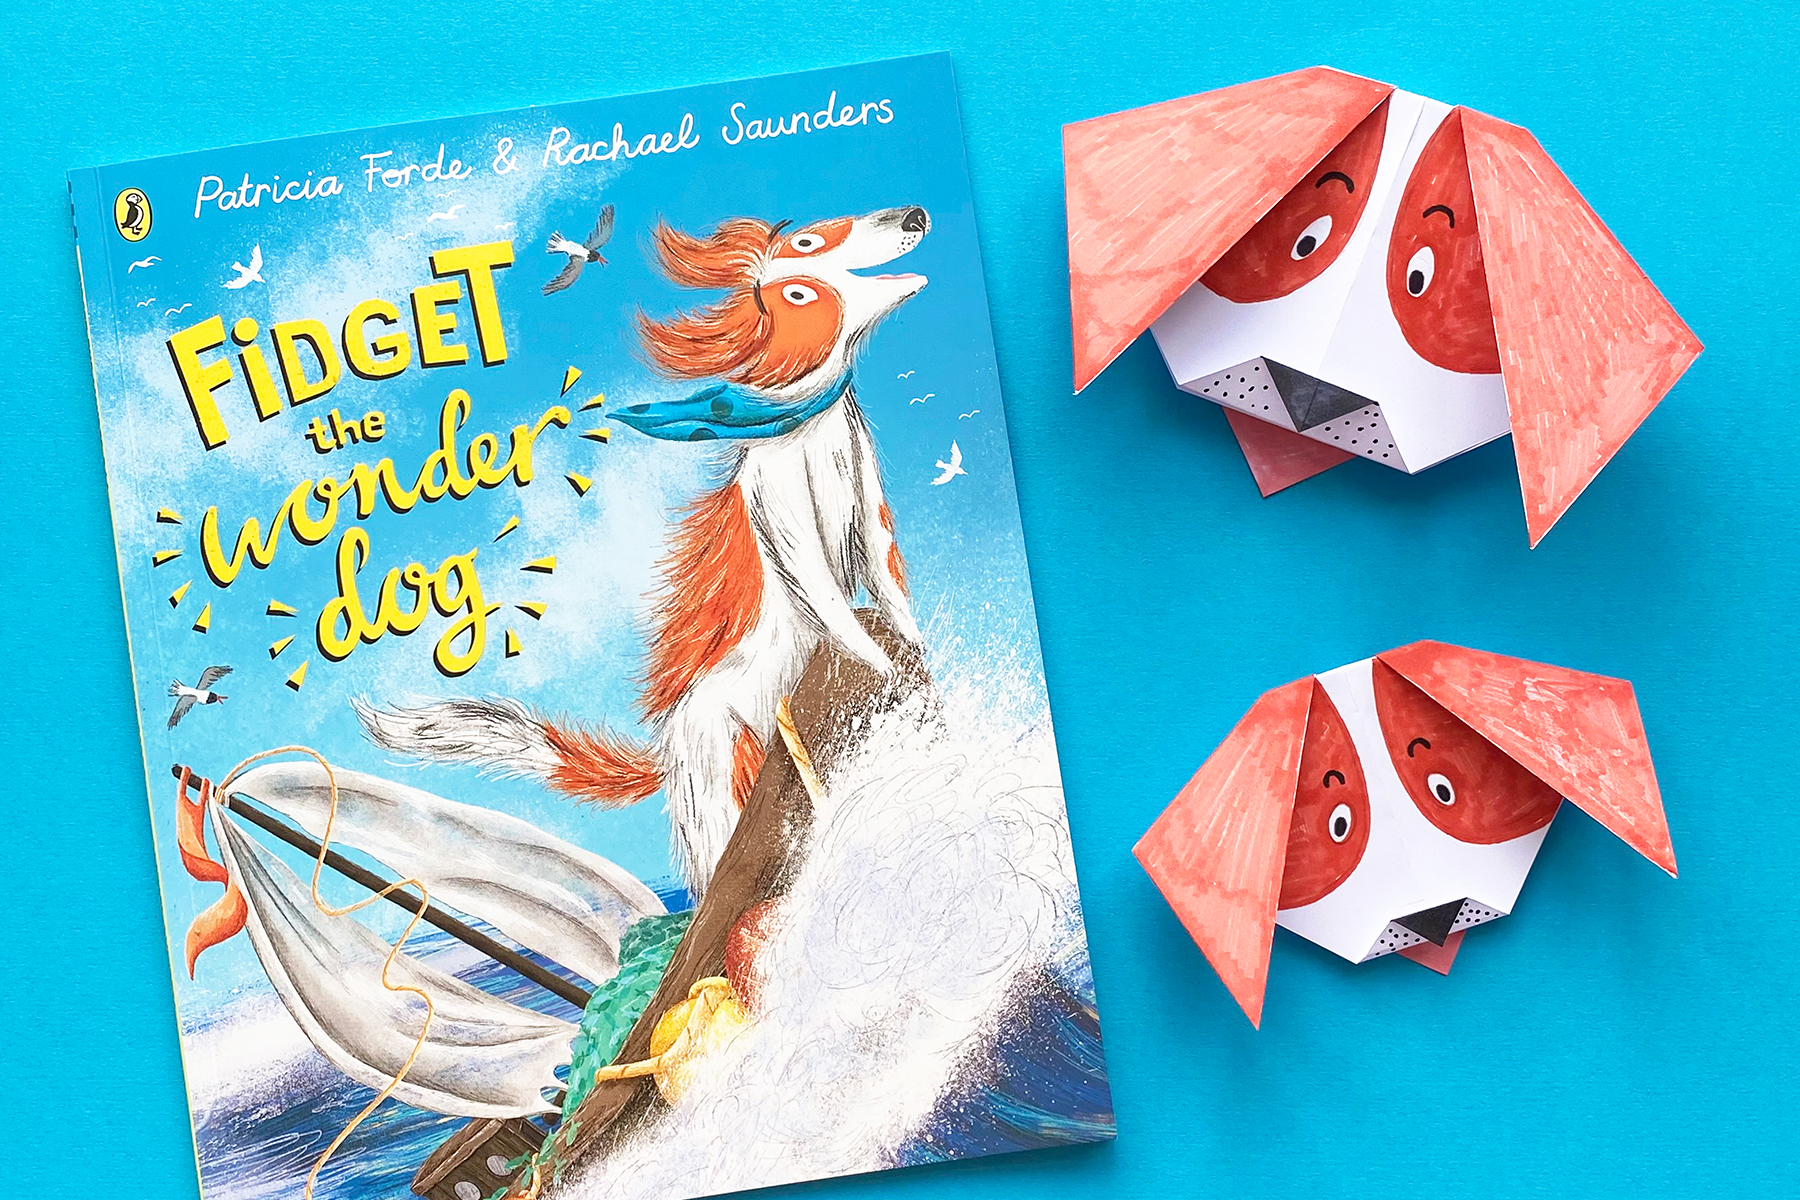 A photo of the book Fidget the Wonder Dog alongside a couple of origami Fidgets on a bright blue background